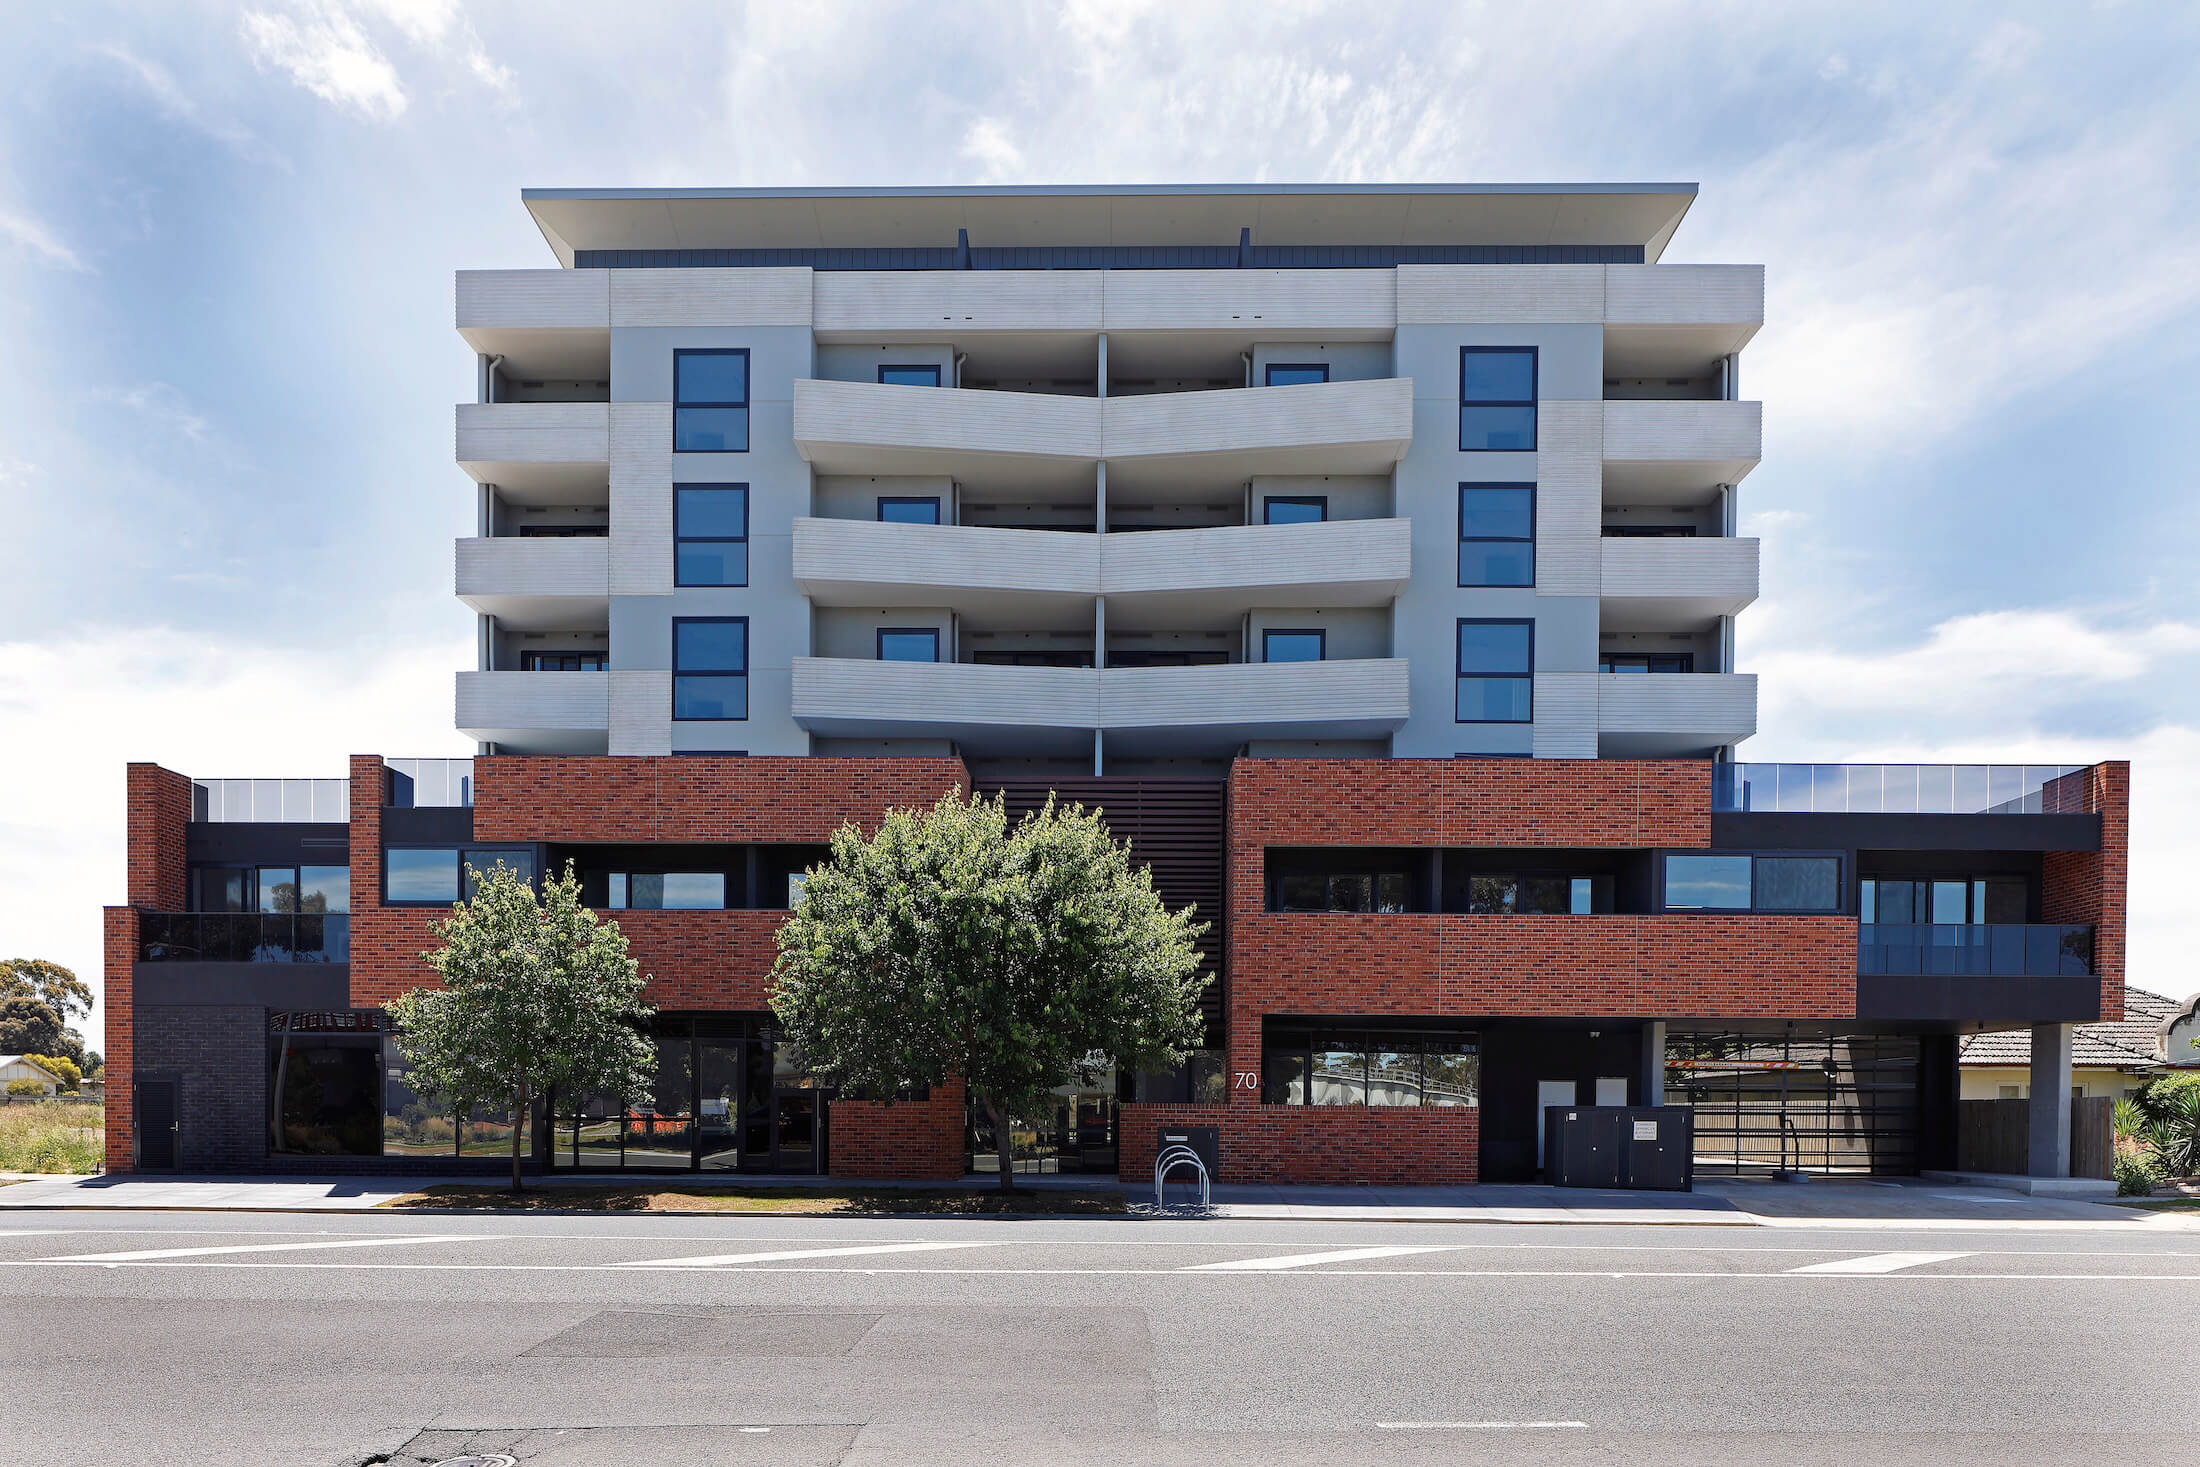 Large residential building with brick plinth and recessive lighter coloured upper floors